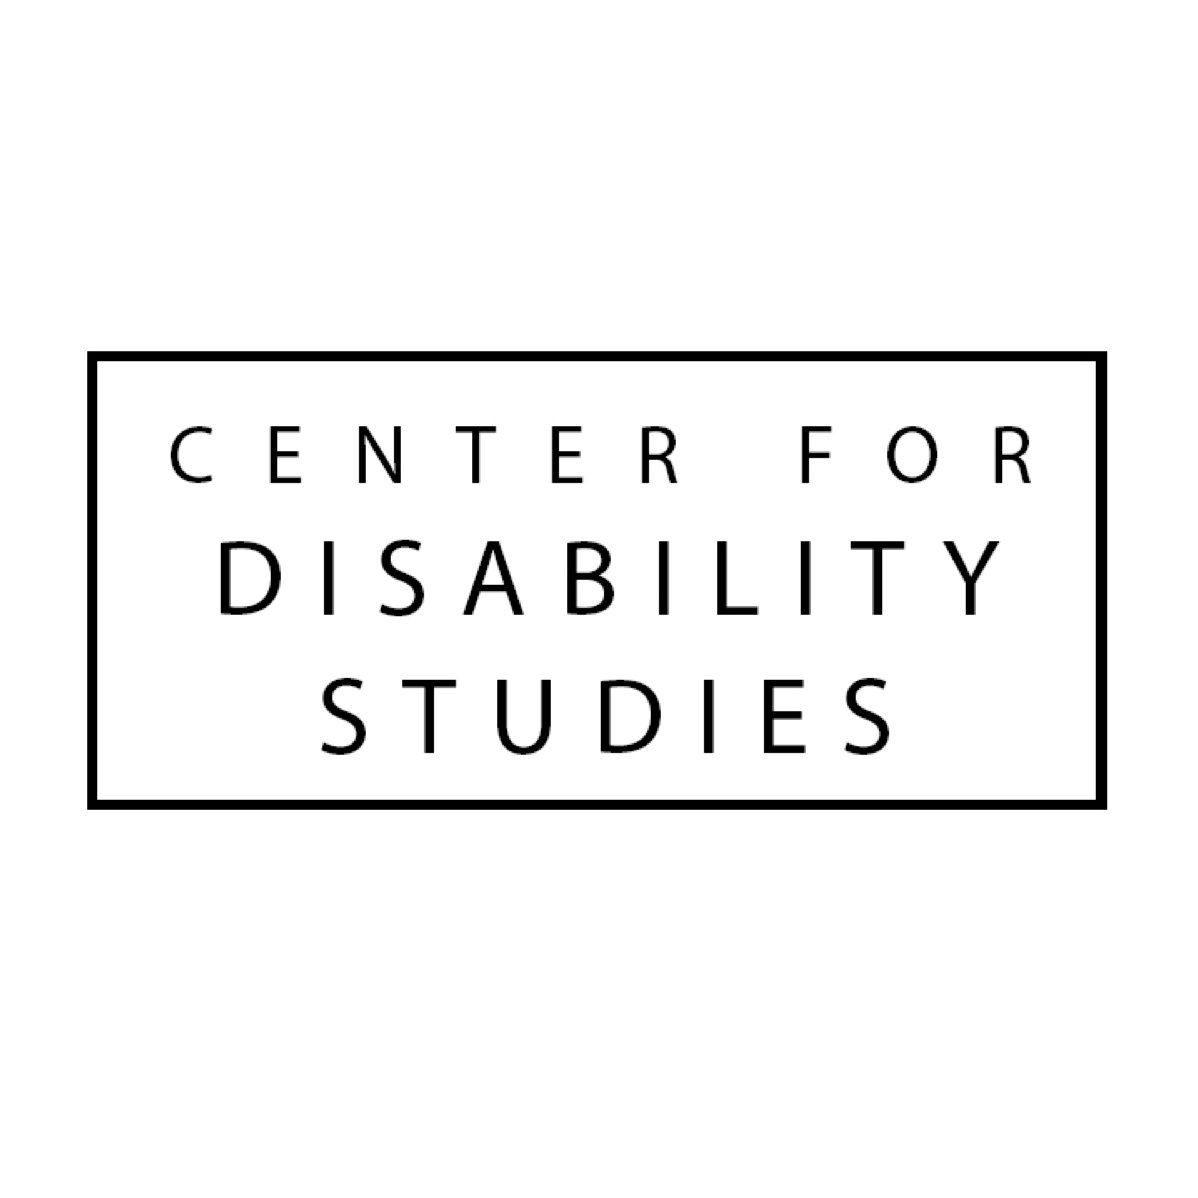 Official Twitter of the Center for Disability Studies at NYU. Home of the minor in Disability Studies. Fall '23 virtual programs announced.